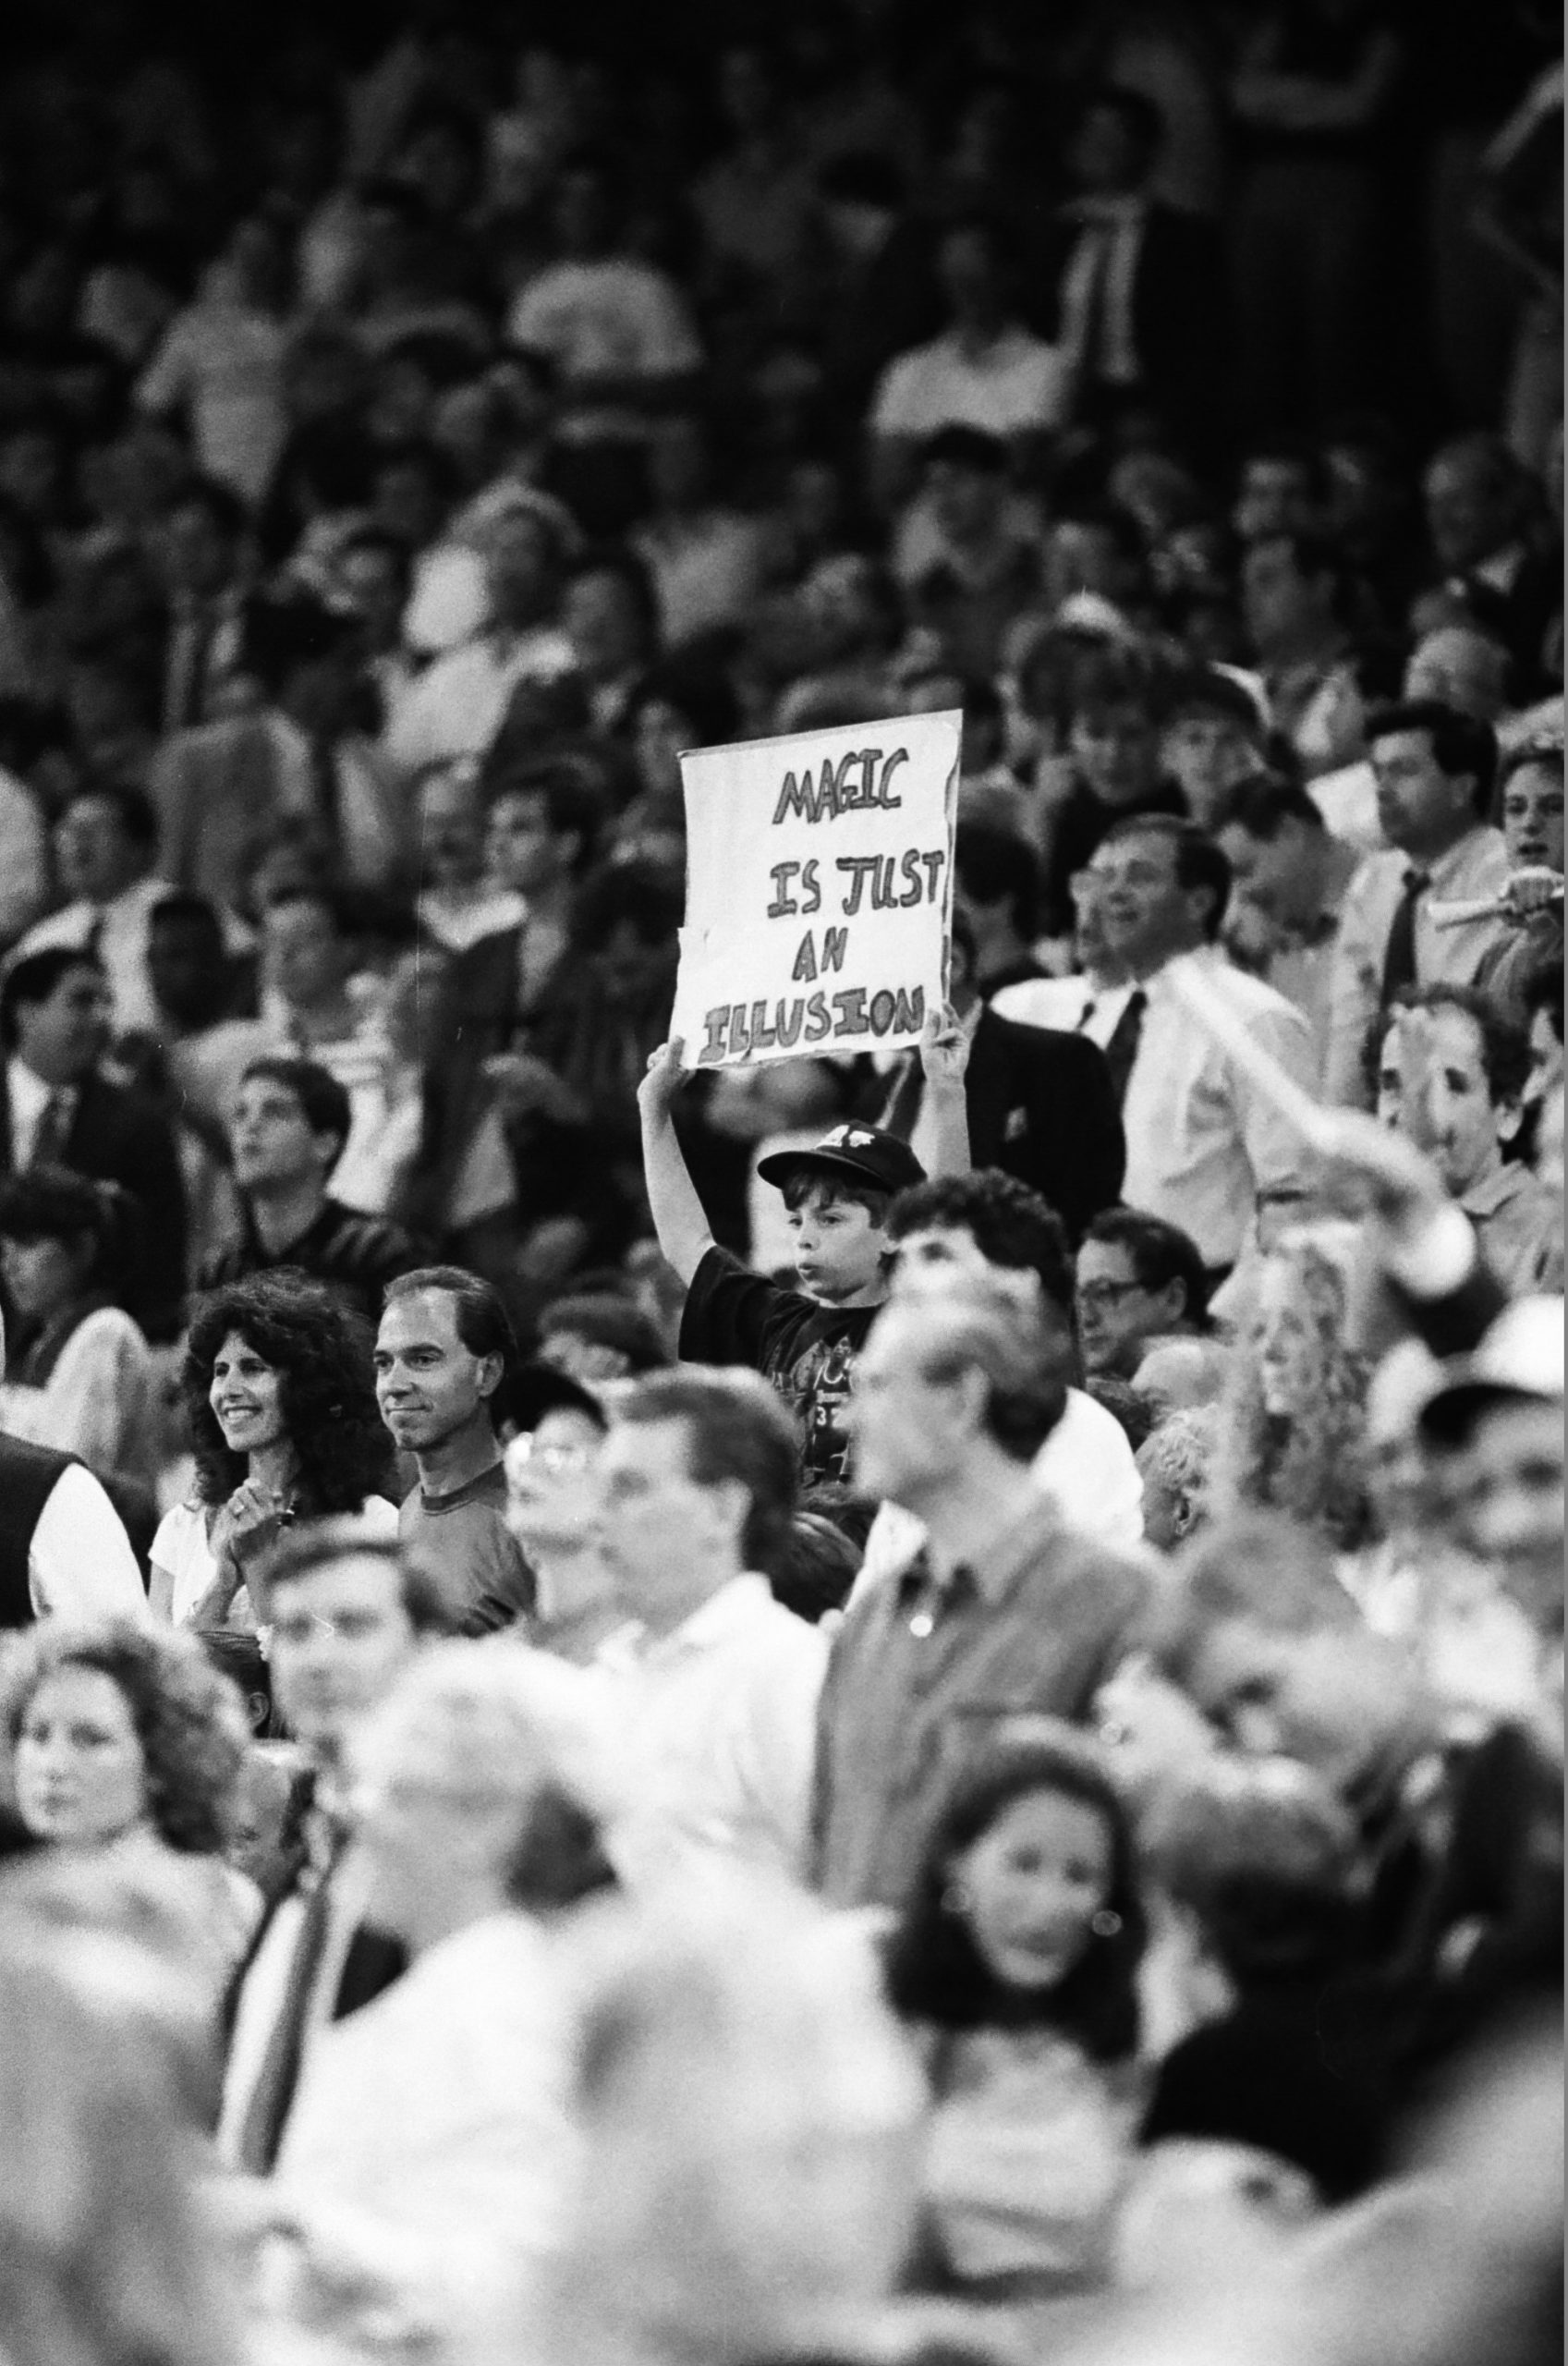 A young Bulls fan in the crowd holds a sign that reads “Magic is just an illusion"